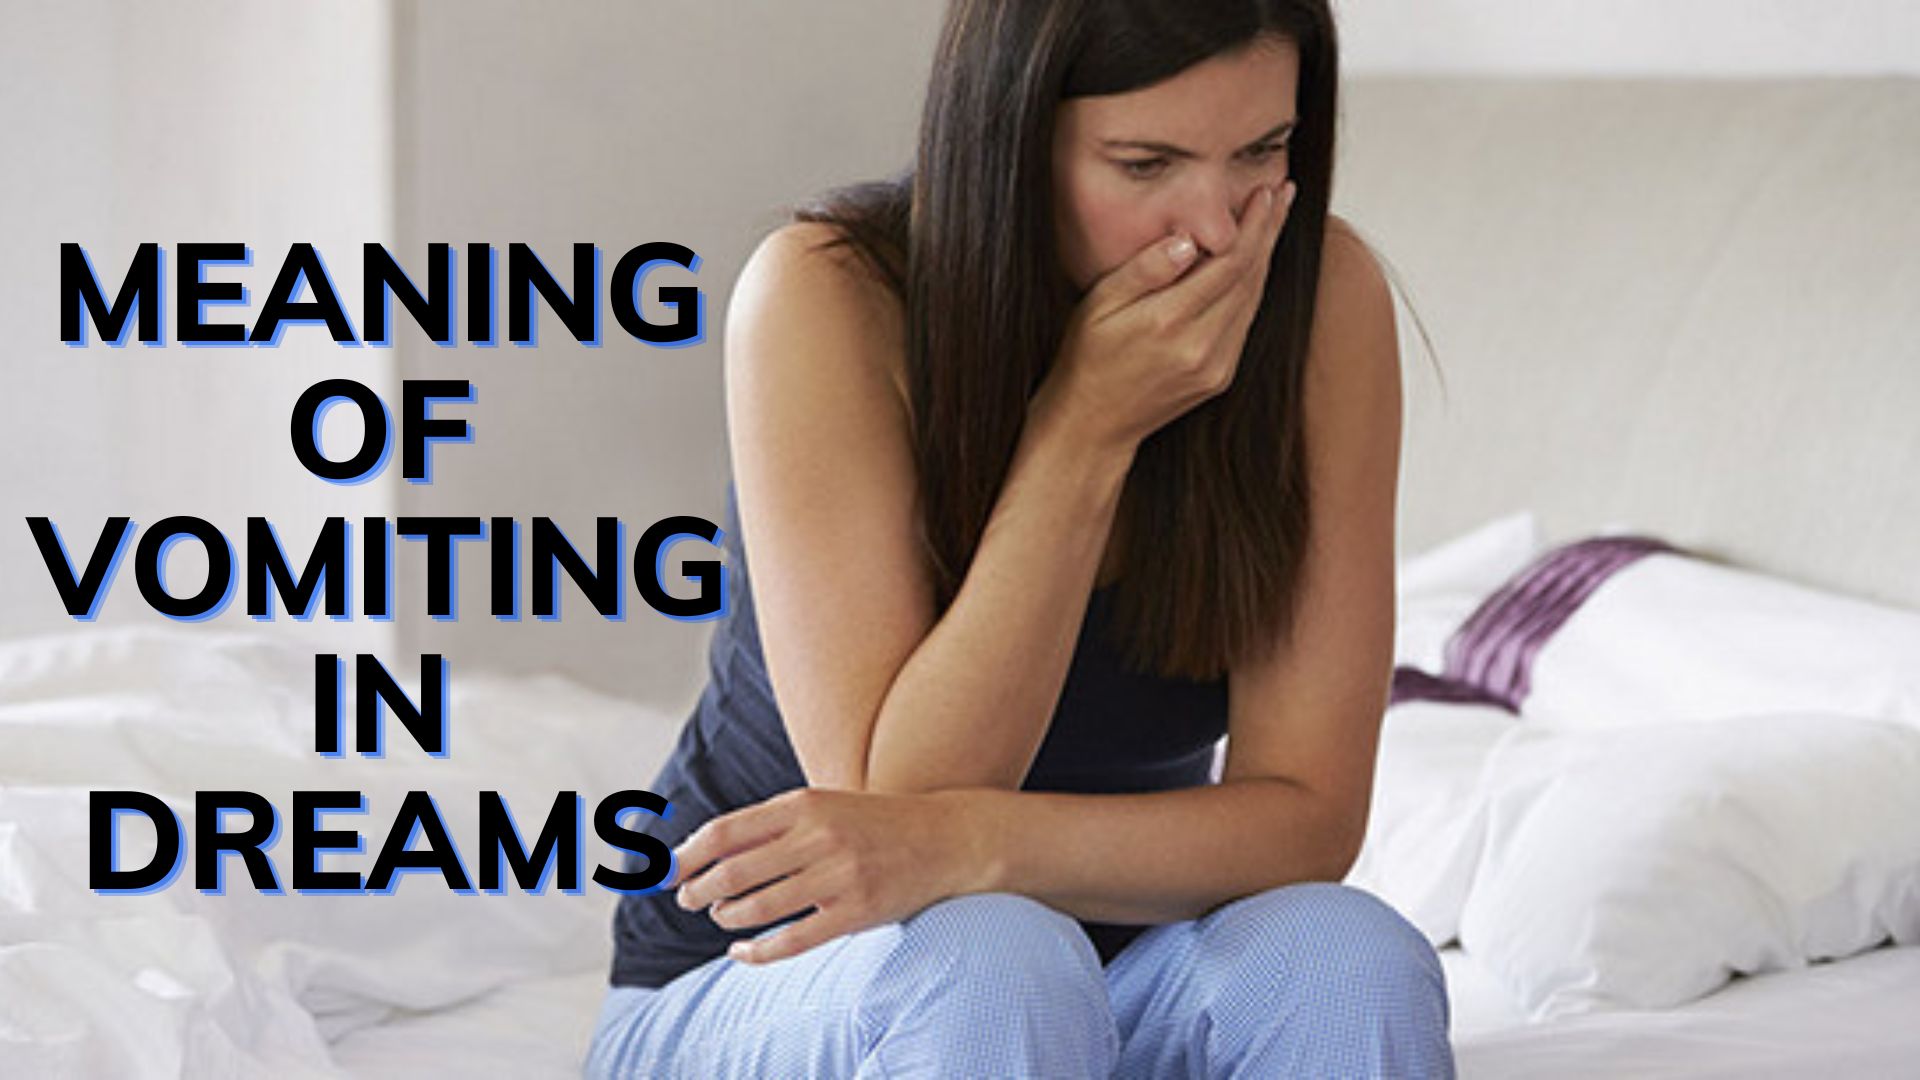 Meaning Of Vomiting In Dreams - Prevention Of An Illness